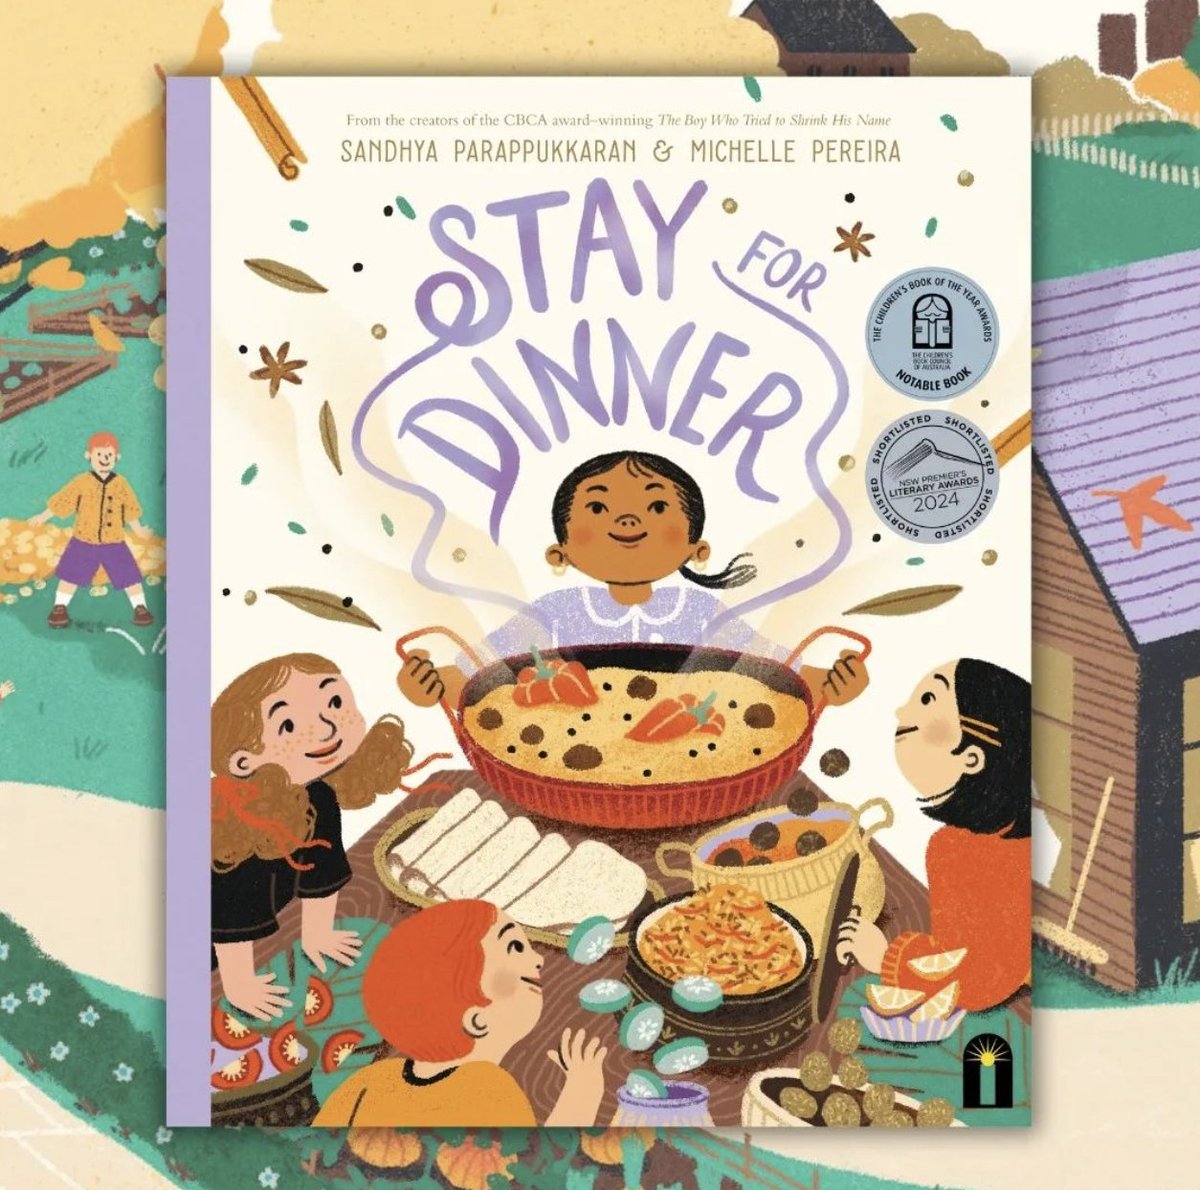 Well done to AWC graduate Sandhya Parappukkaran who has been announced on the shortlist for the NSW Premier’s Literary Awards 2024 for her picture book 'Stay for Dinner'! Congratulations Sandhya!